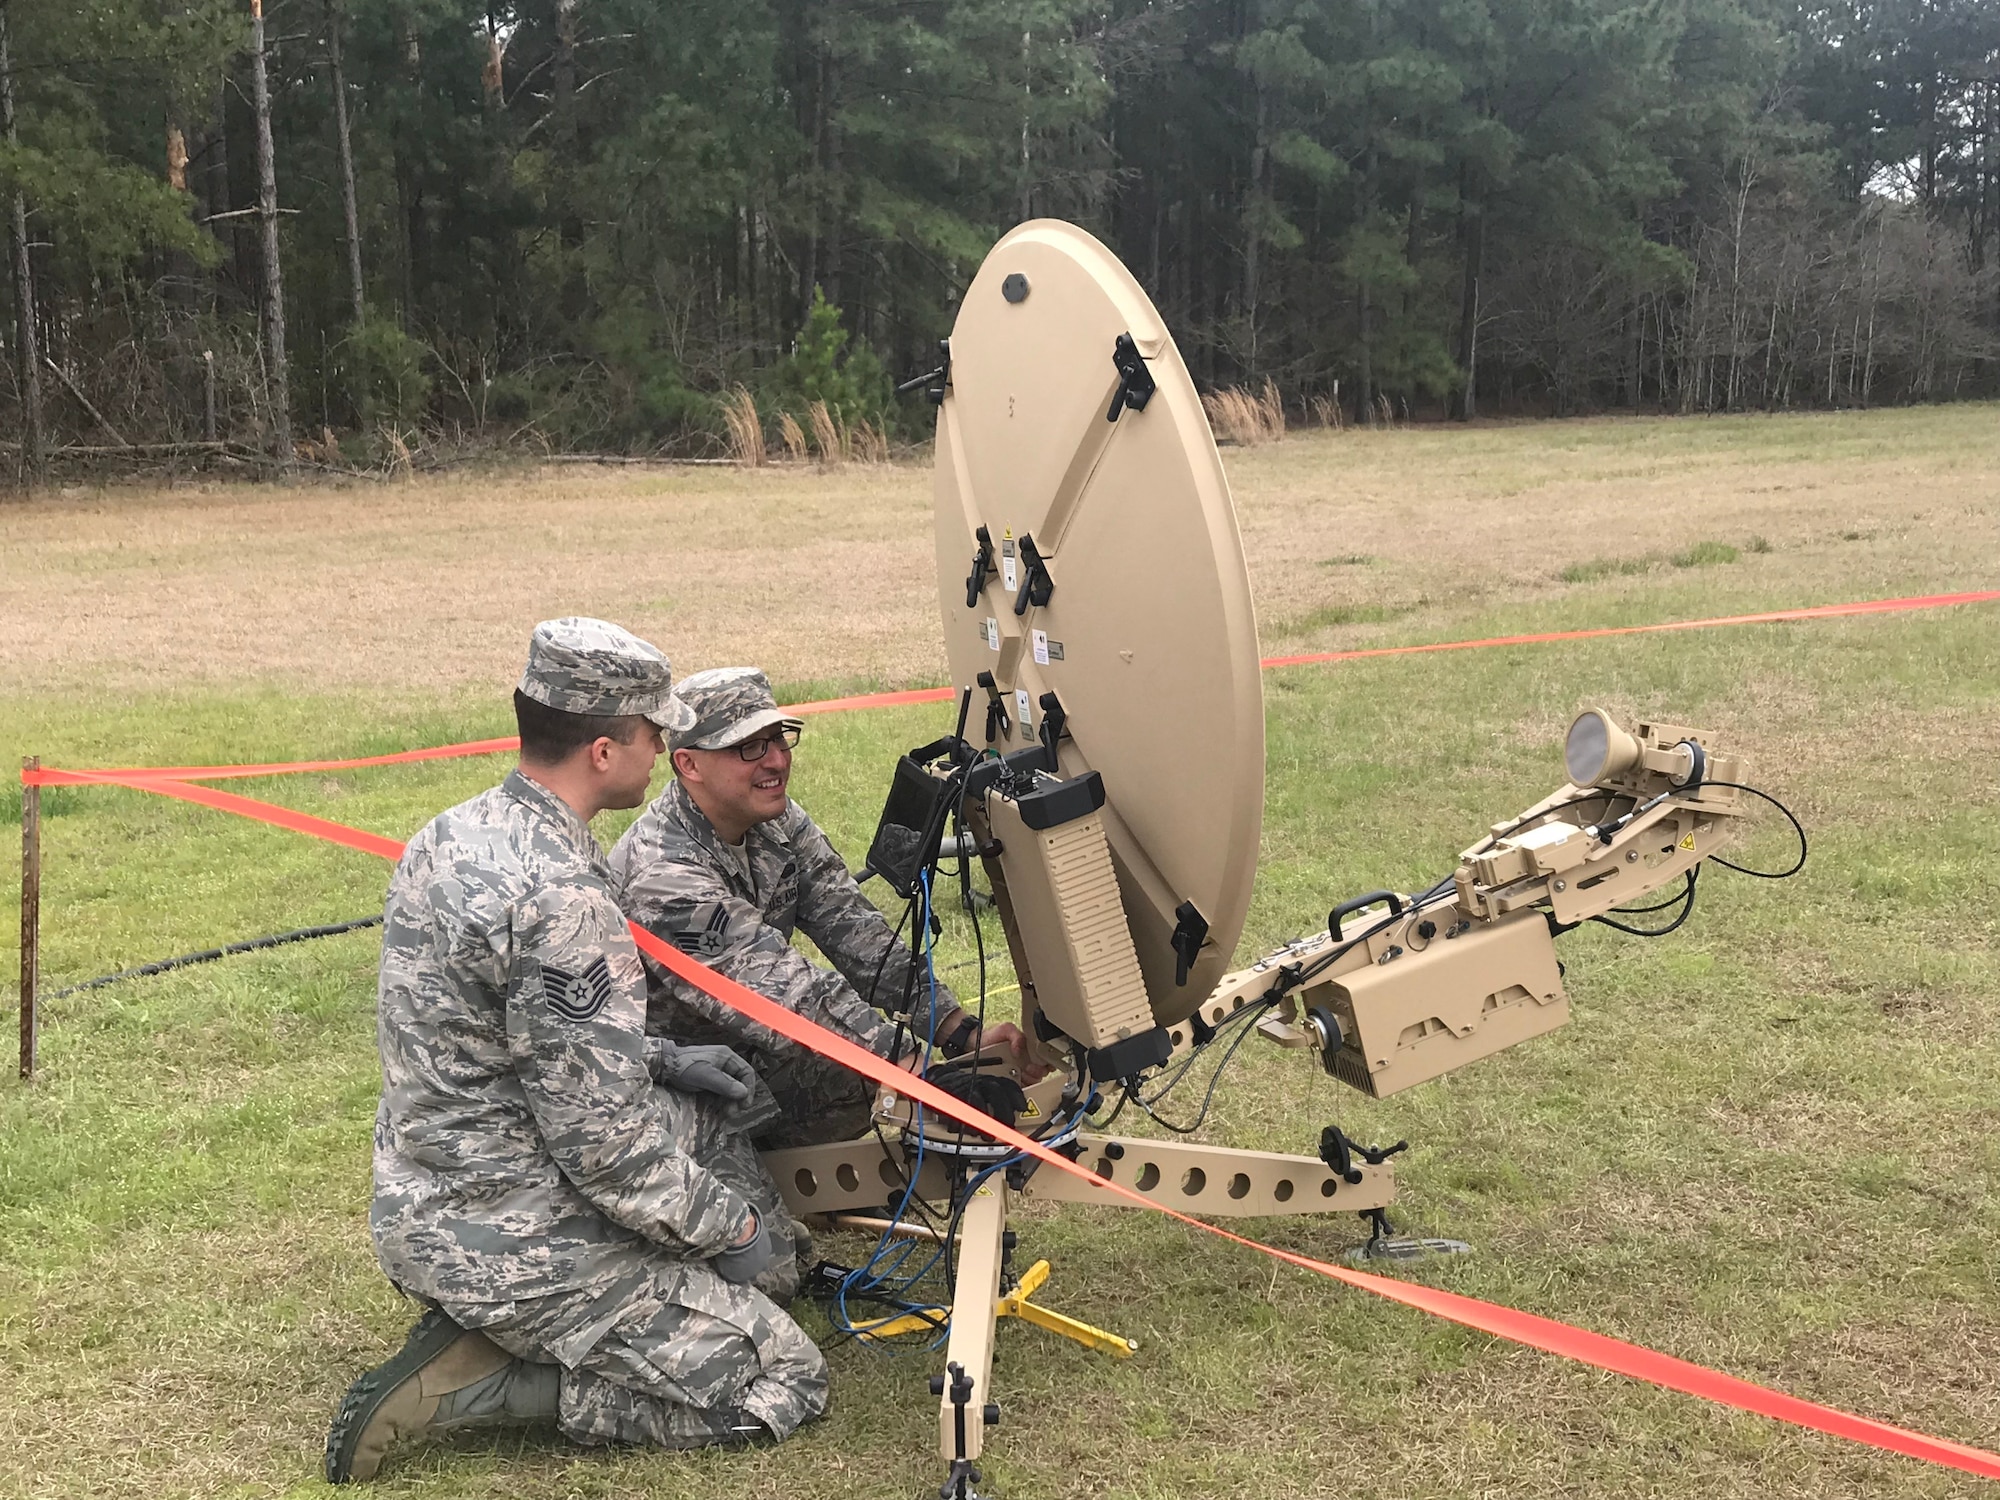 Members of the 263rd Combat Communications Squadron participate in the Combat Communications (CBC) Rodeo while at Robins Air Force Base, Georgia, Mar. 8, 2019. The CBC Rodeo is a Nationwide training exercise that brings together Combat Communications Squadrons from across the country to train in techniques and skills while networking to increase the potential success of future deployments.